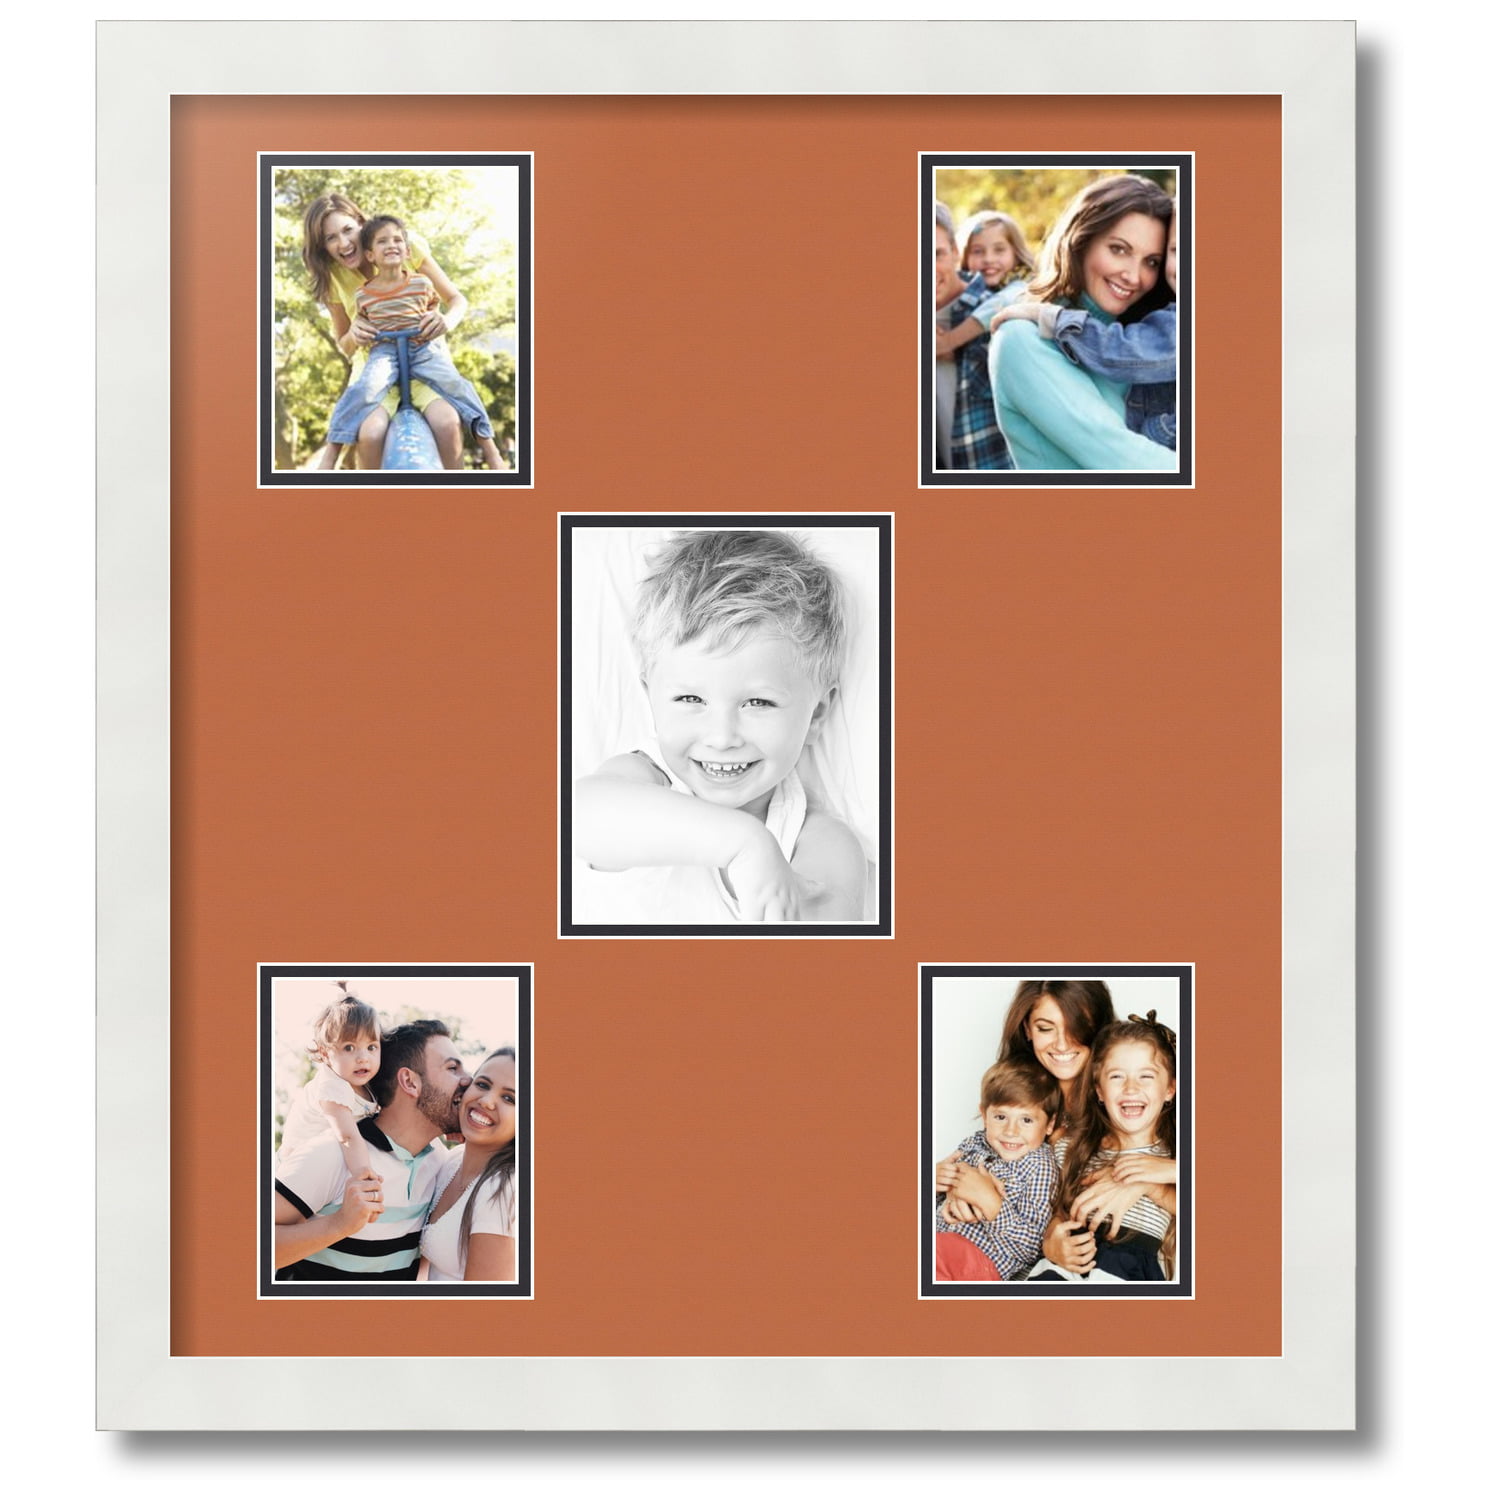 4 4x5" Openings in Satin Black 5 ArtToFrames Collage Mat Picture Photo Frame 